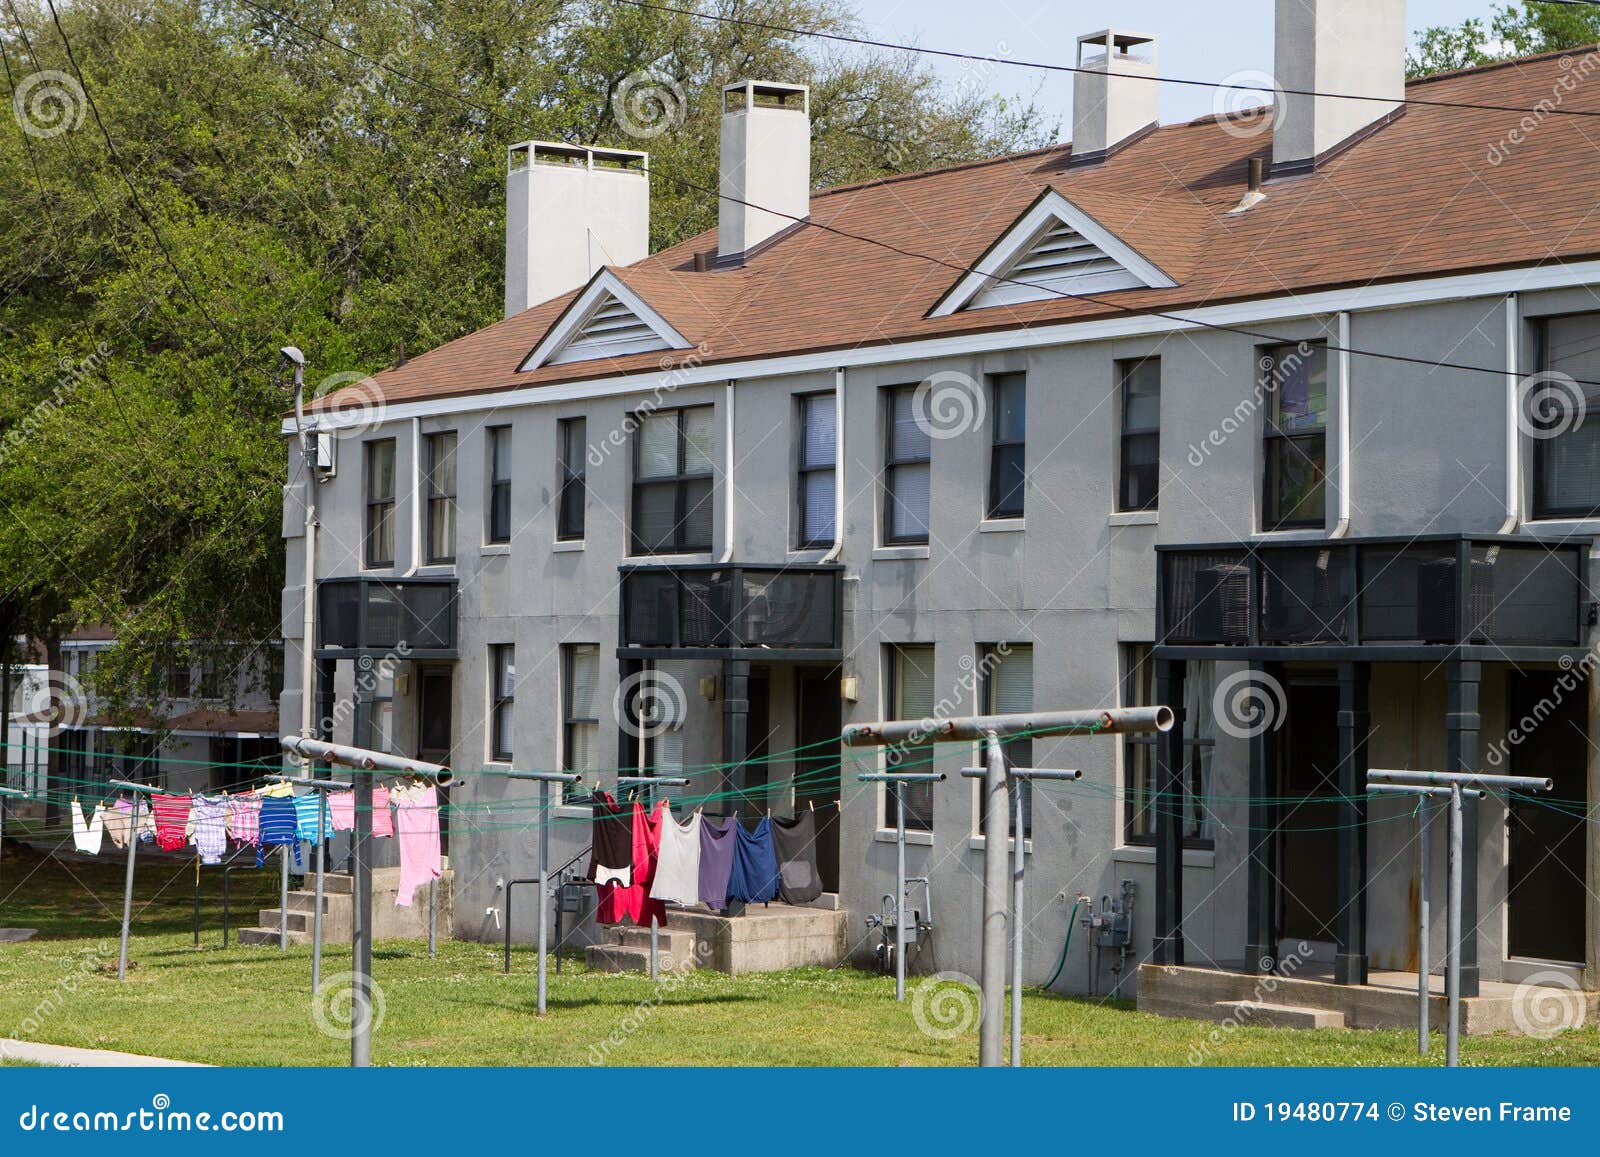 low income housing